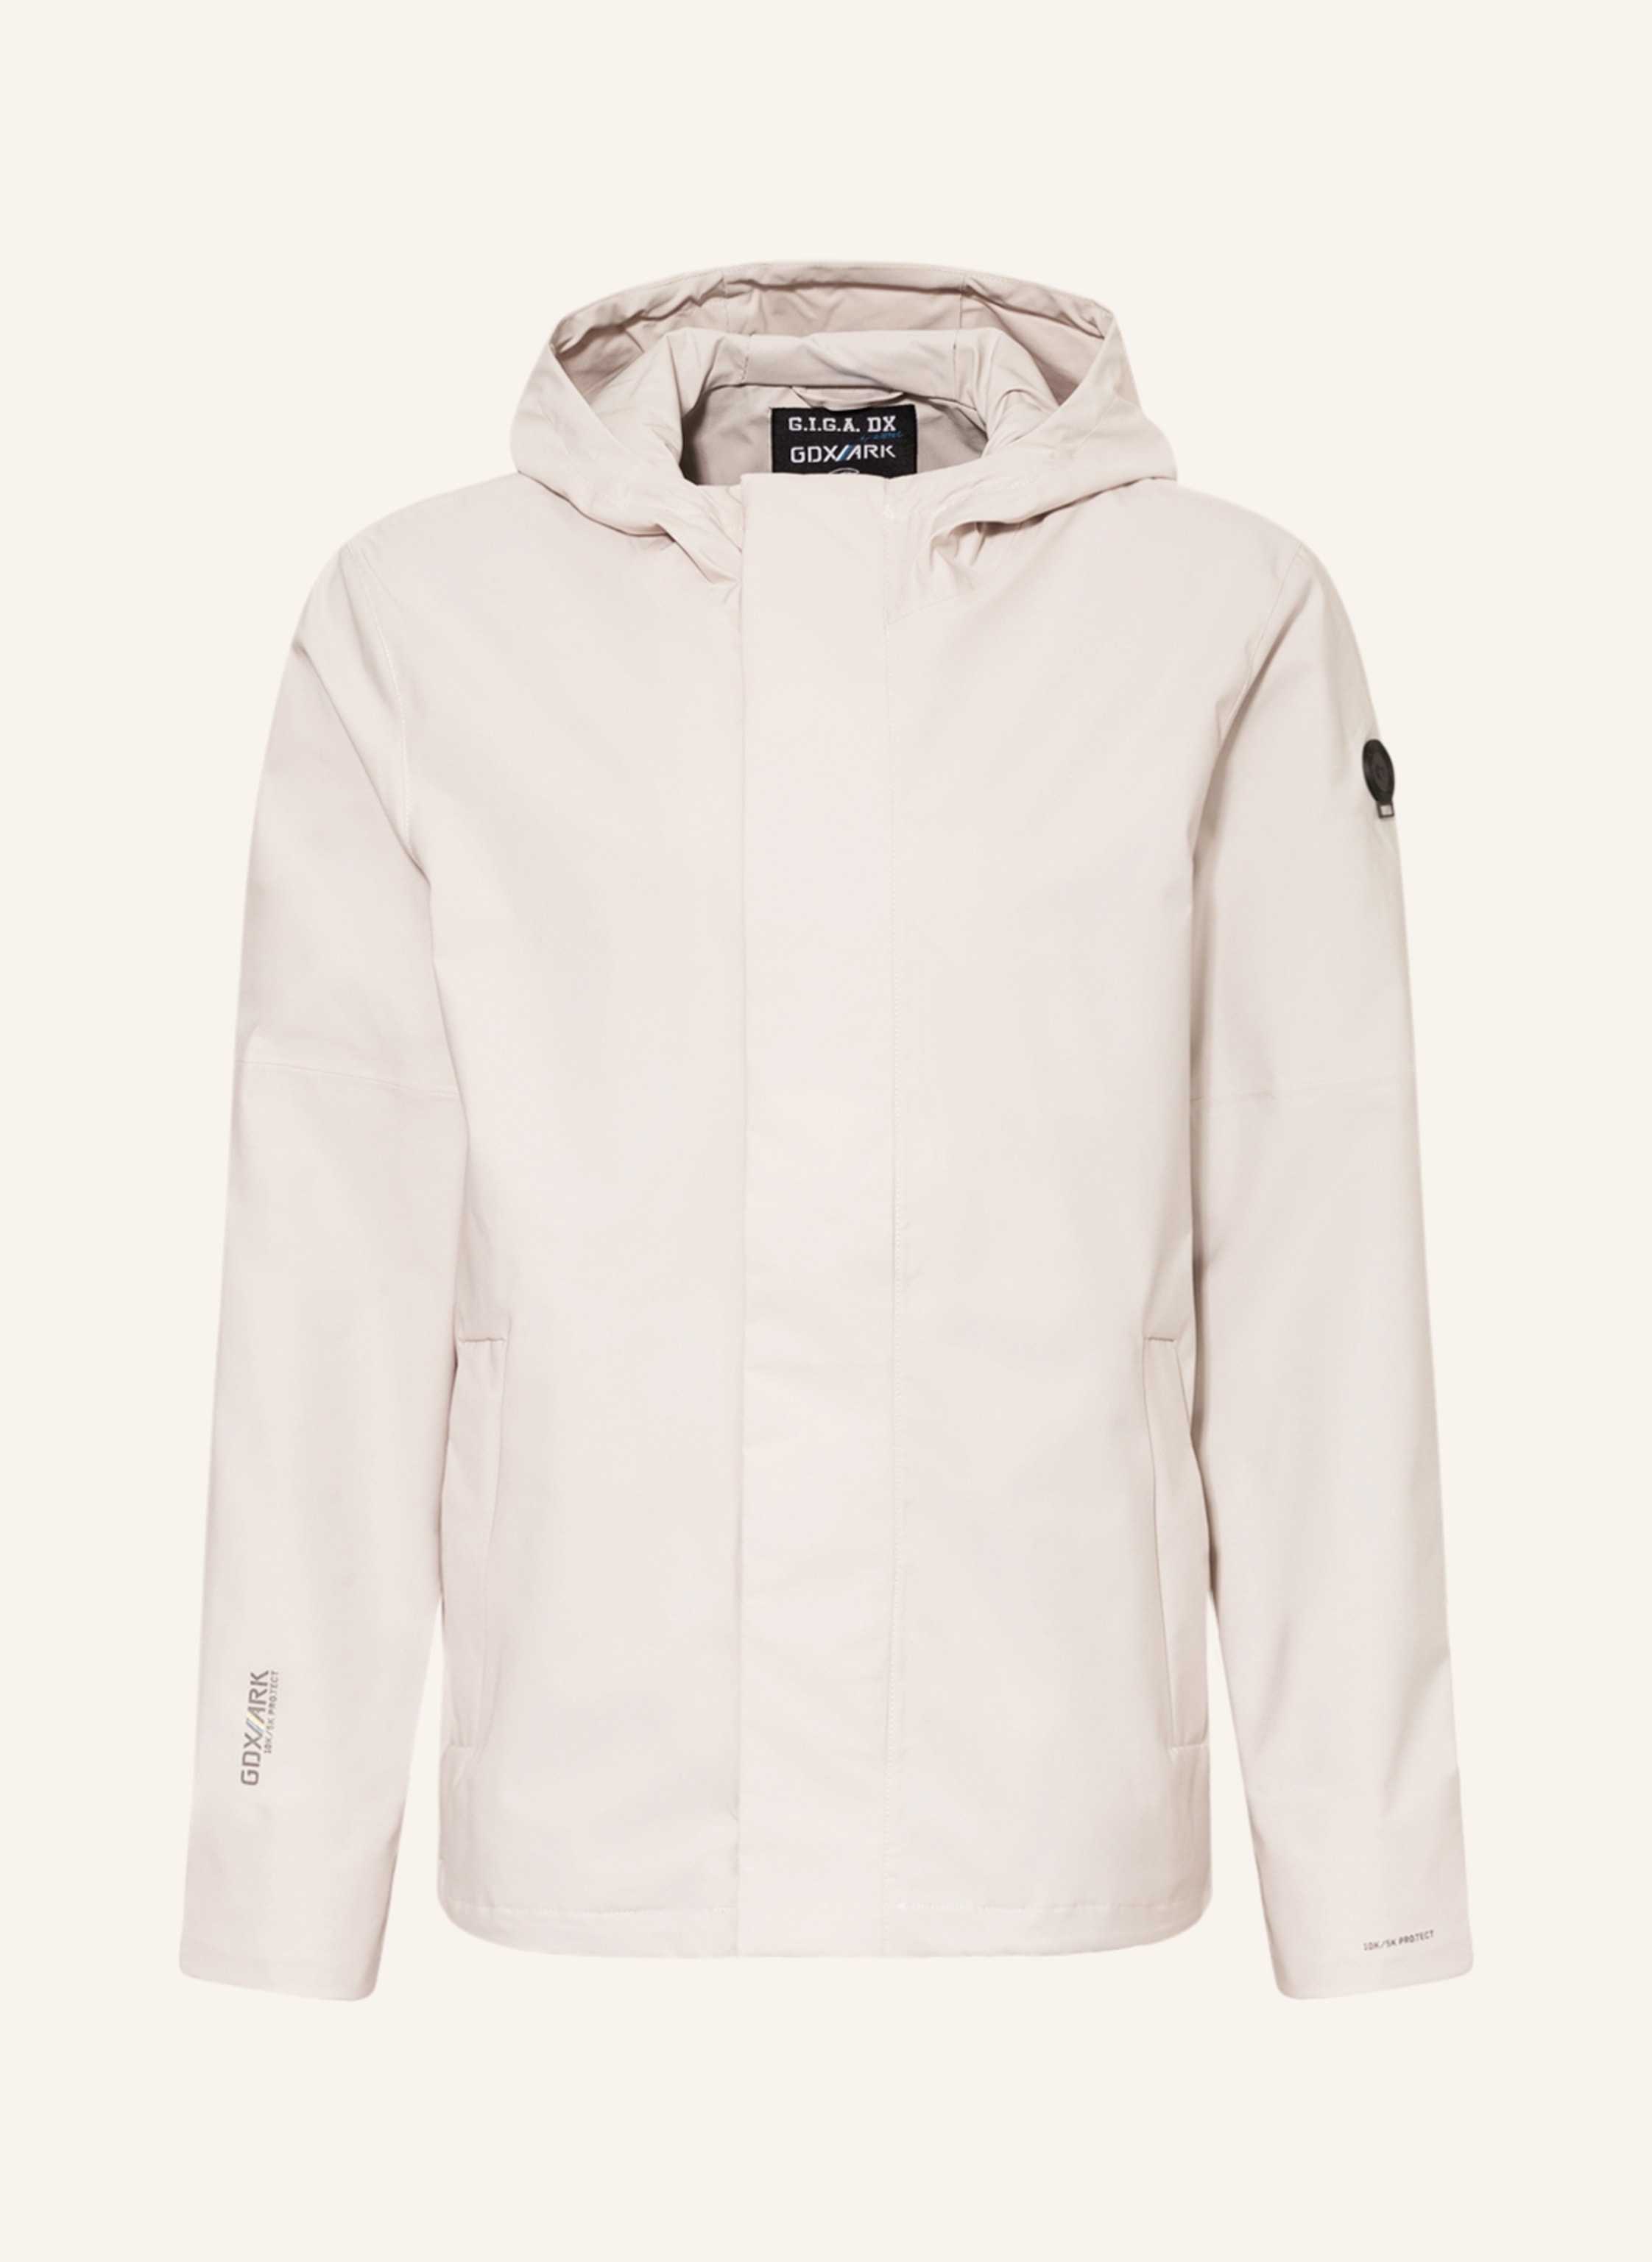 G.I.G.A. DX by killtec Outdoor jacket in GS 147 cream